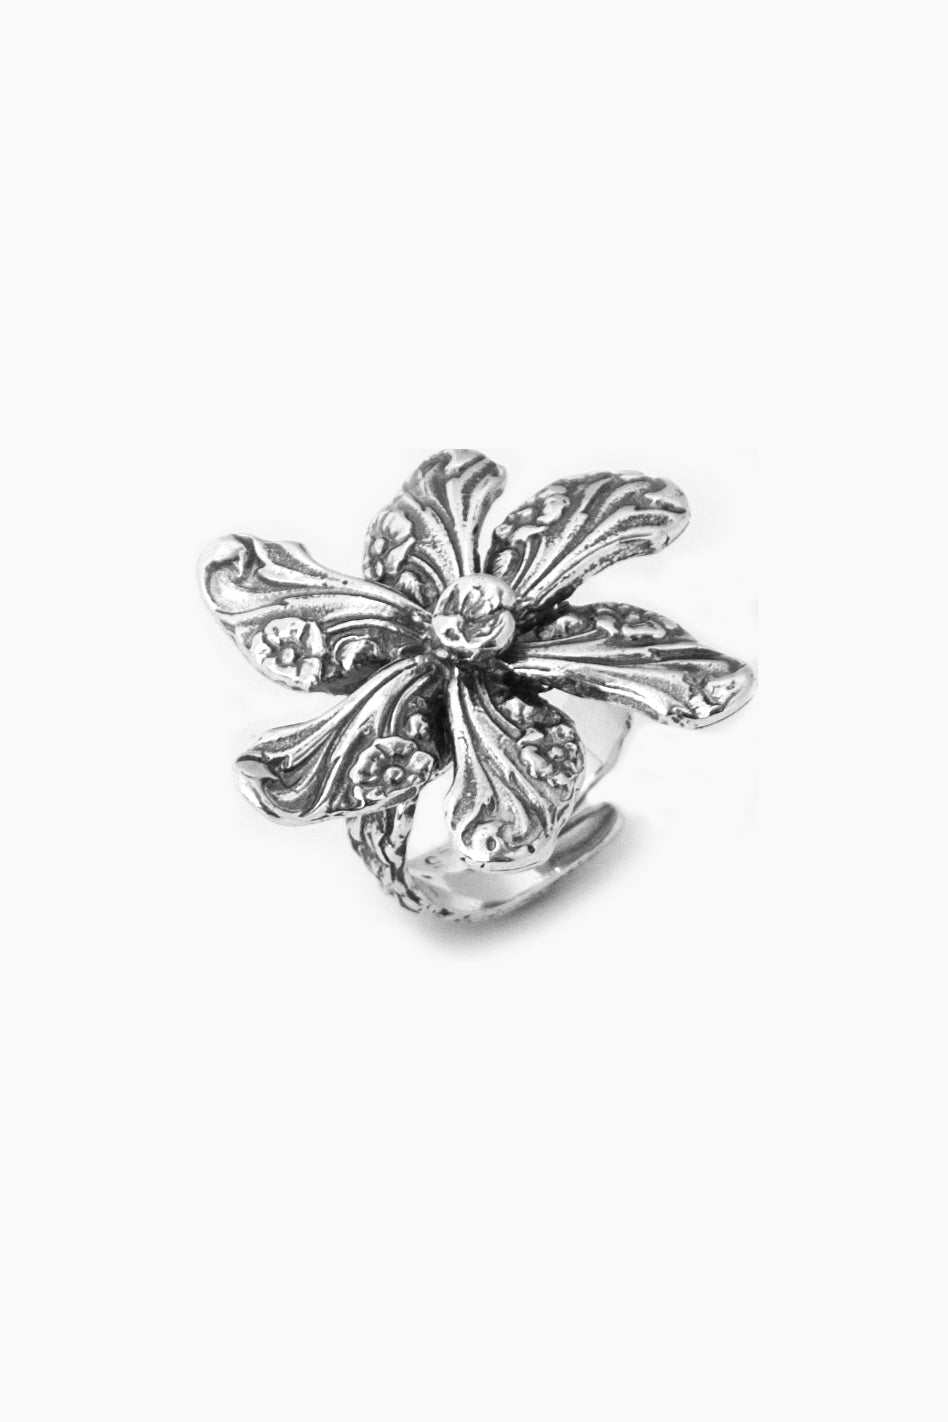 Georgia Sterling Silver Ring - Silver Spoon Jewelry